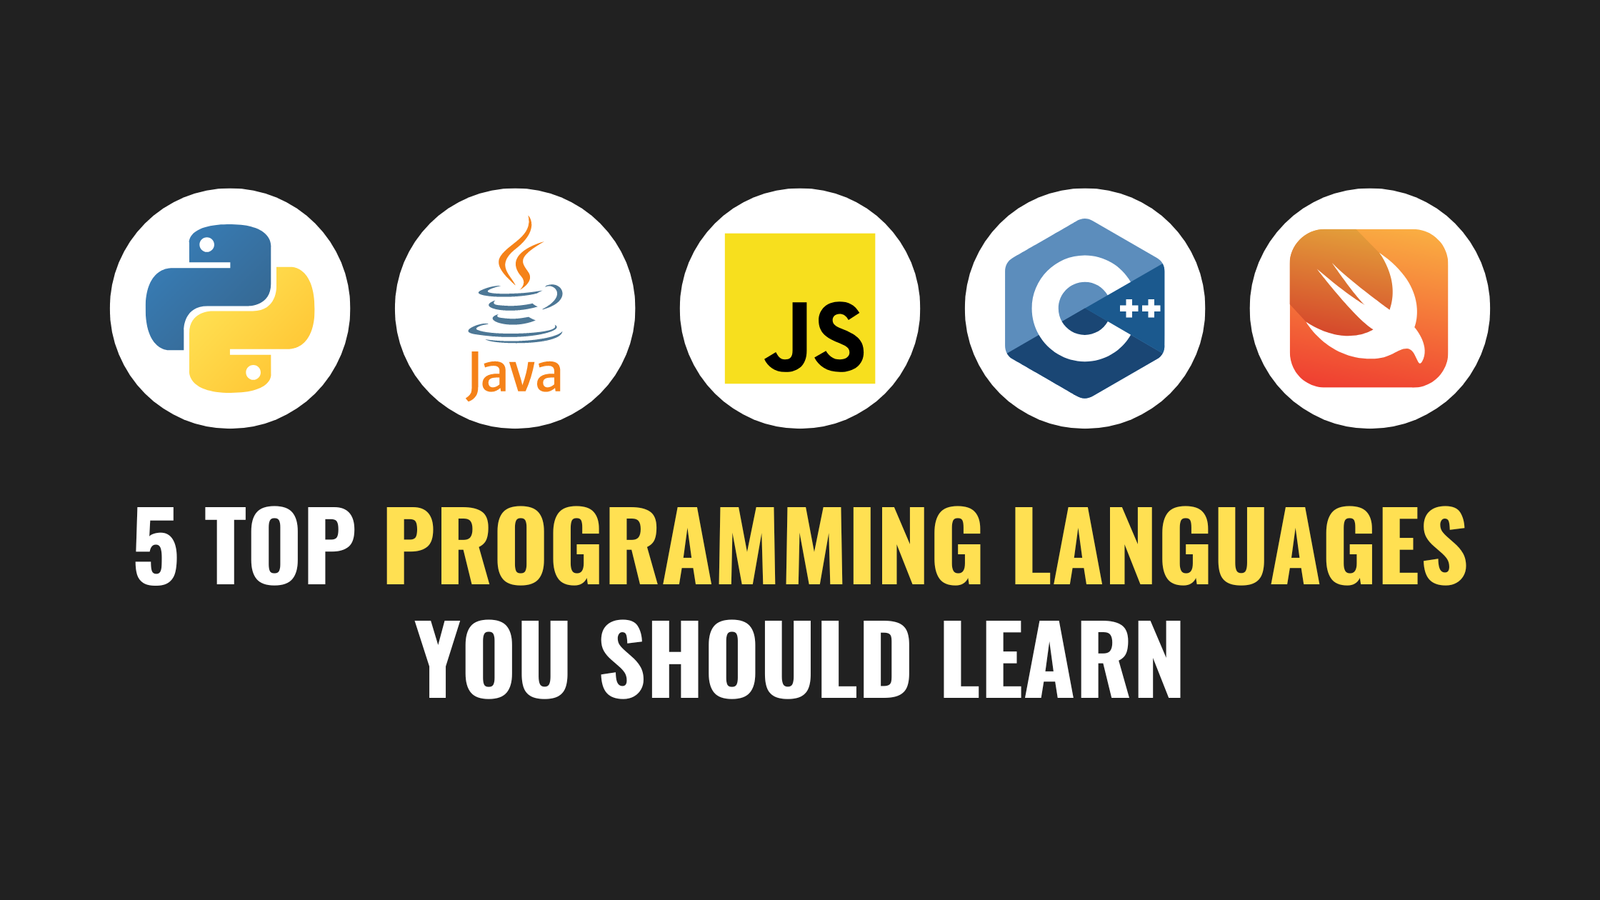 5 Top Programming Languages for 2023